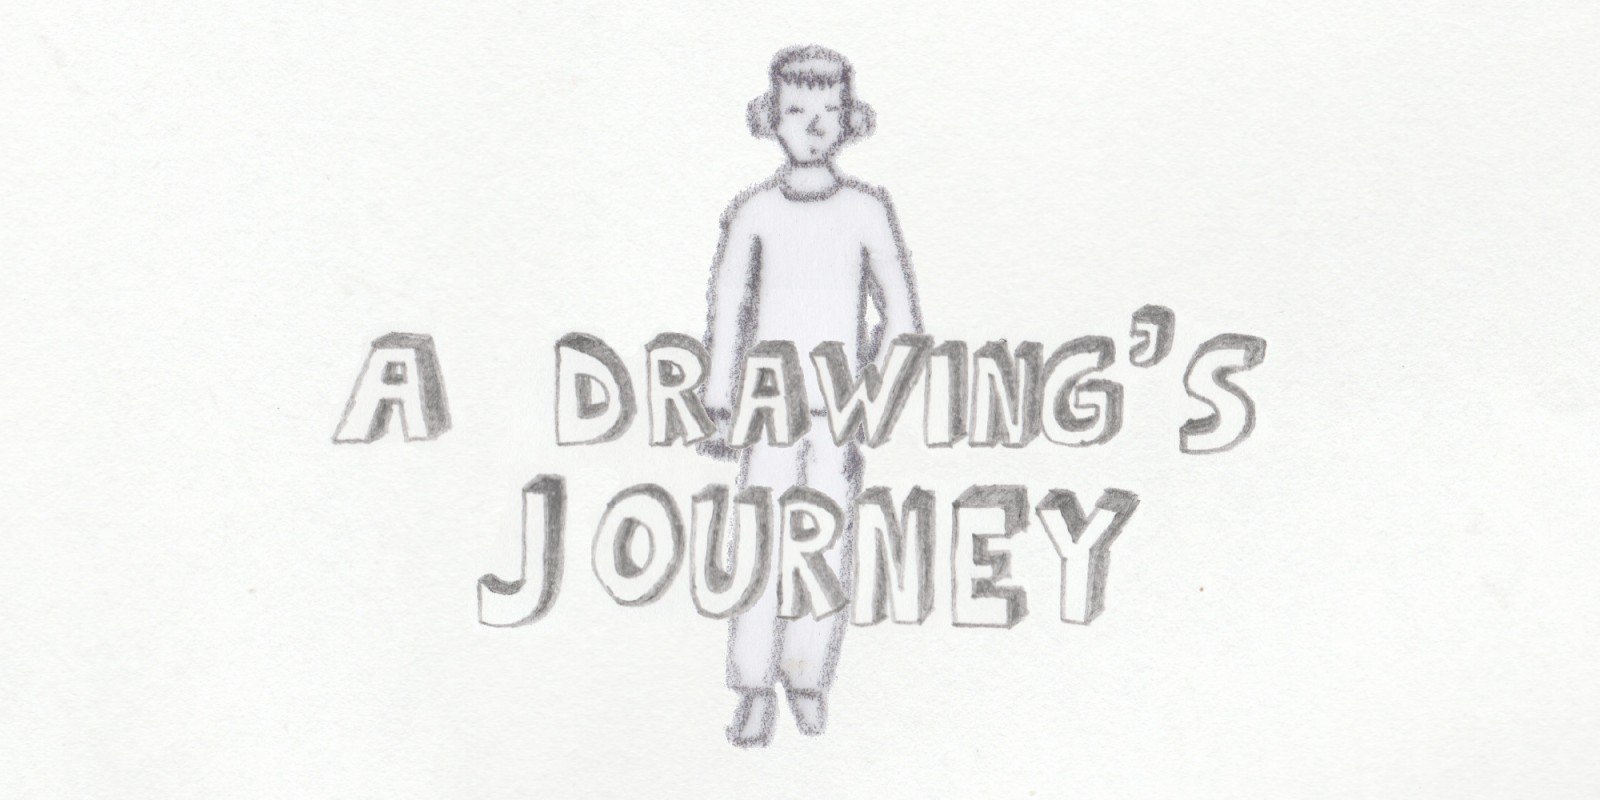 Image of A Drawing's Journey